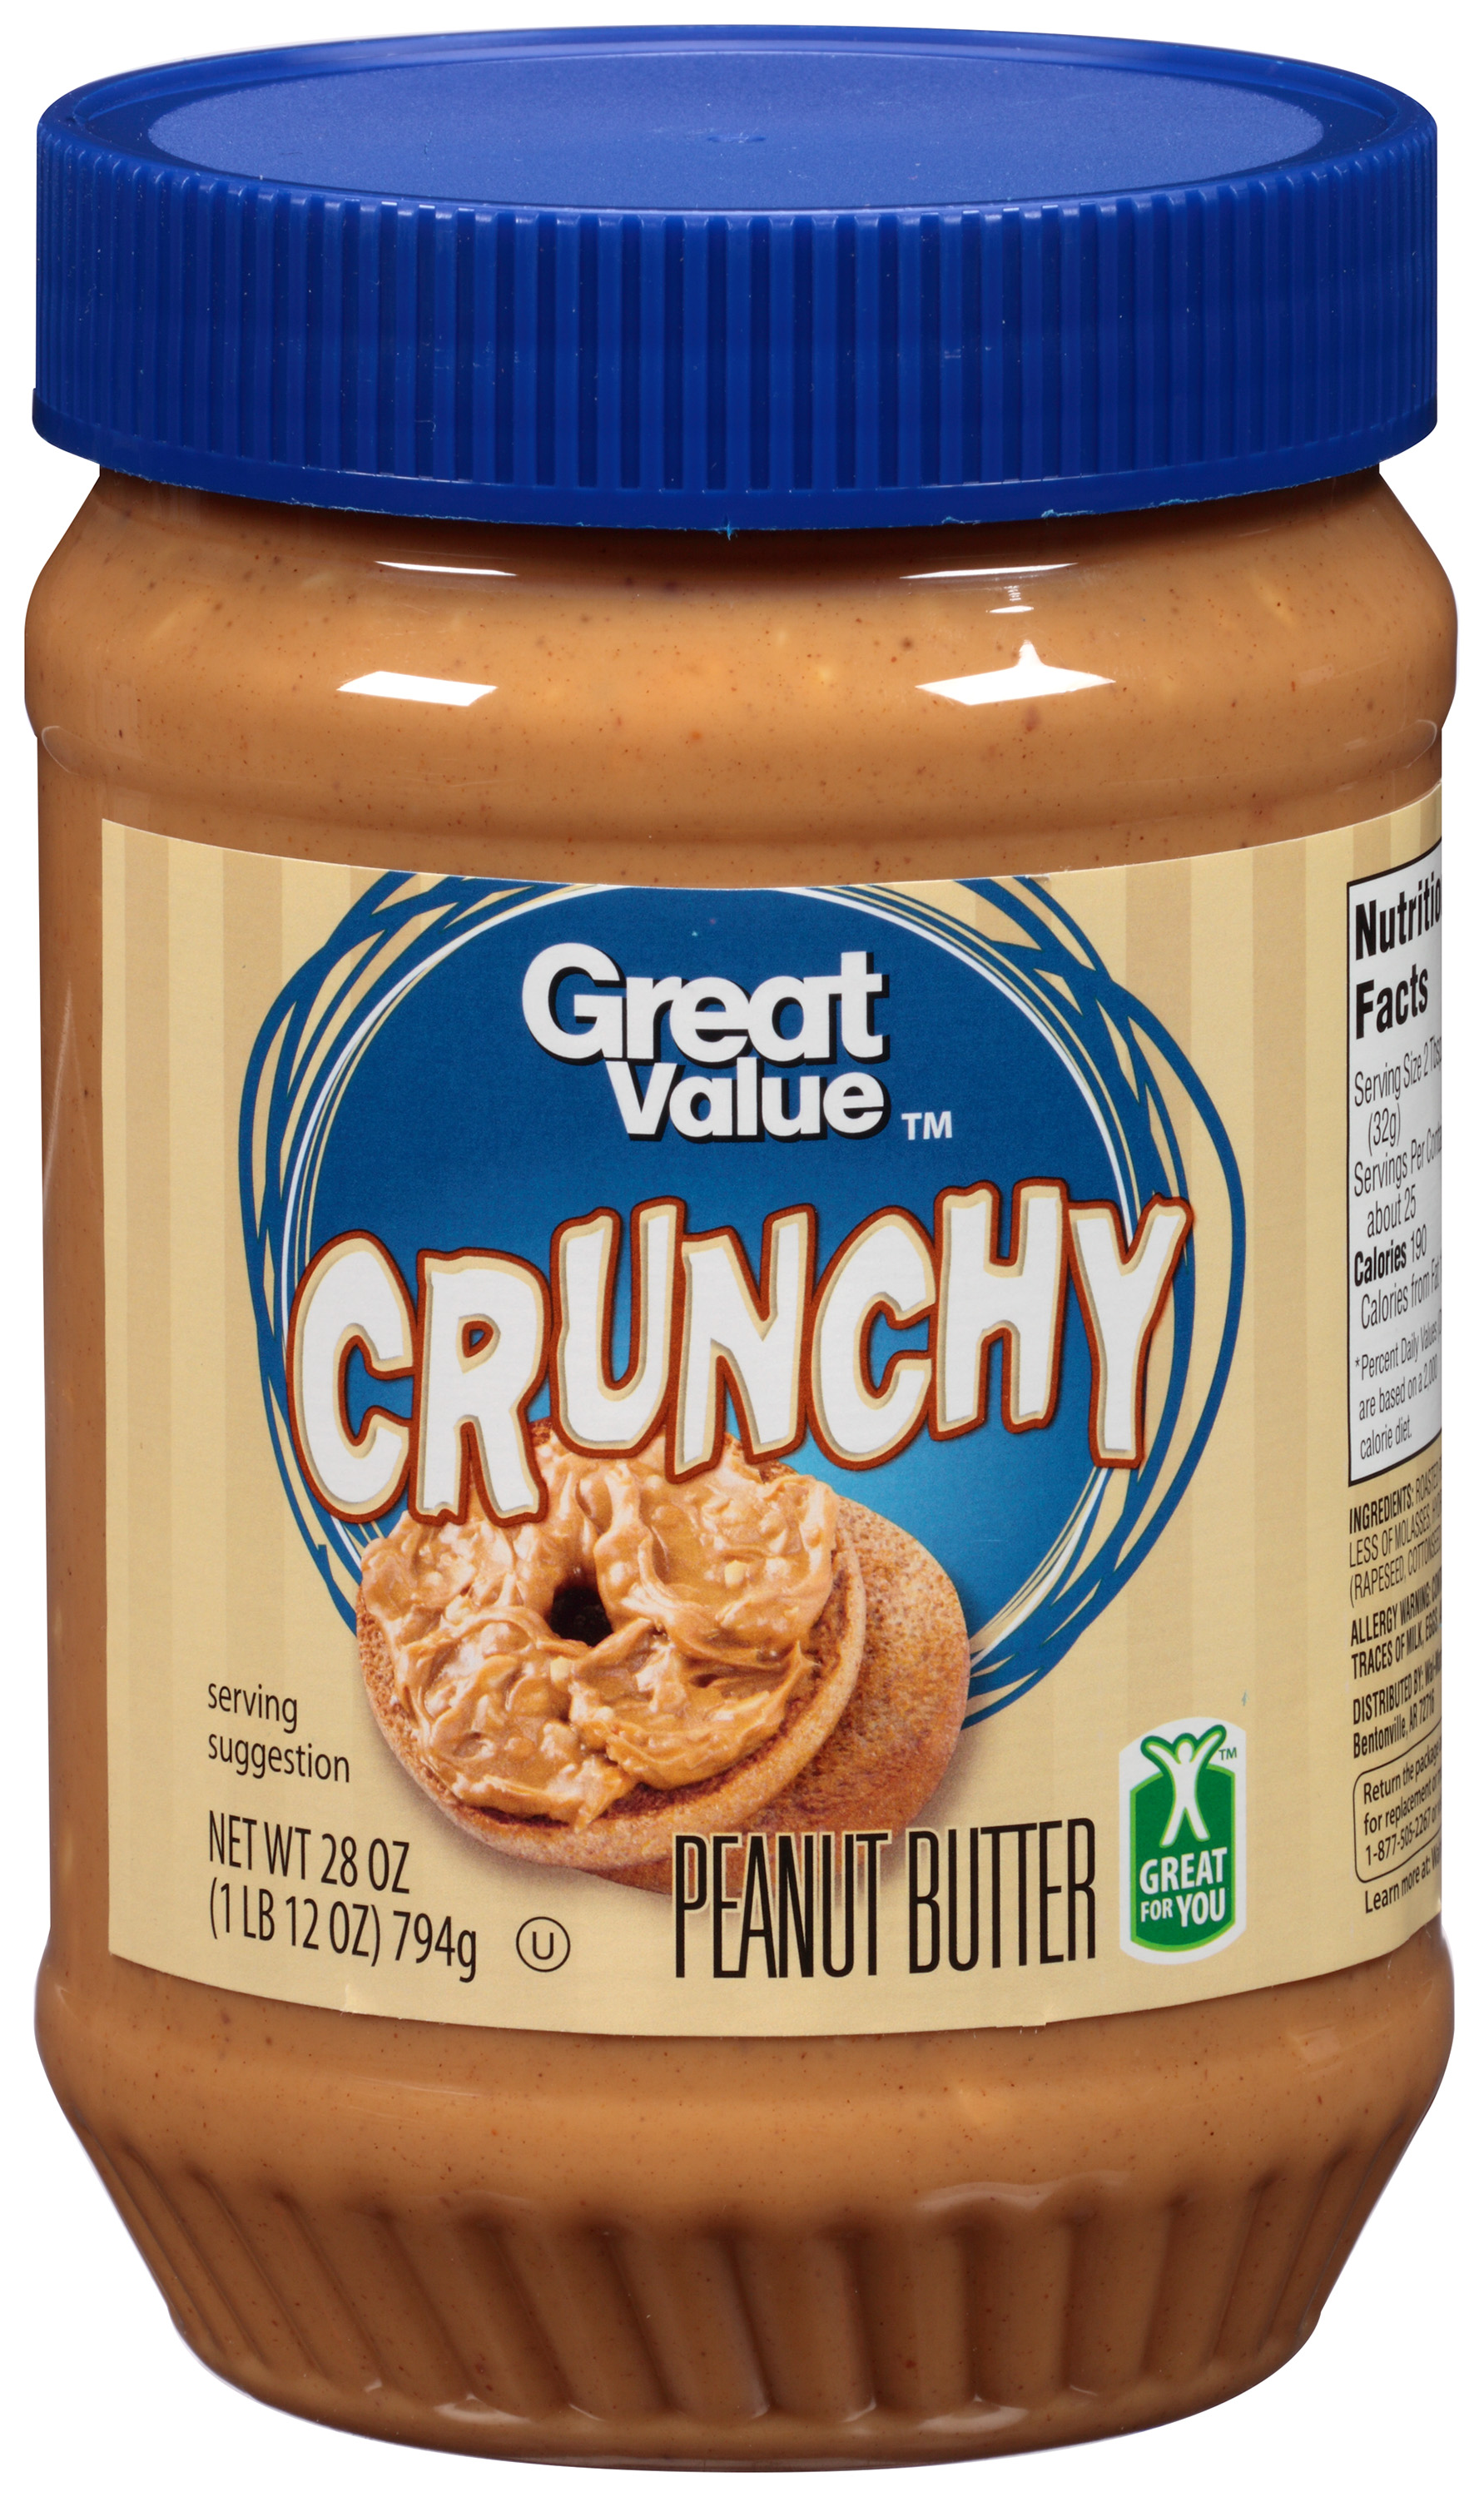 Great Value Crunchy Peanut Butter, 28 Ounces - image 1 of 8